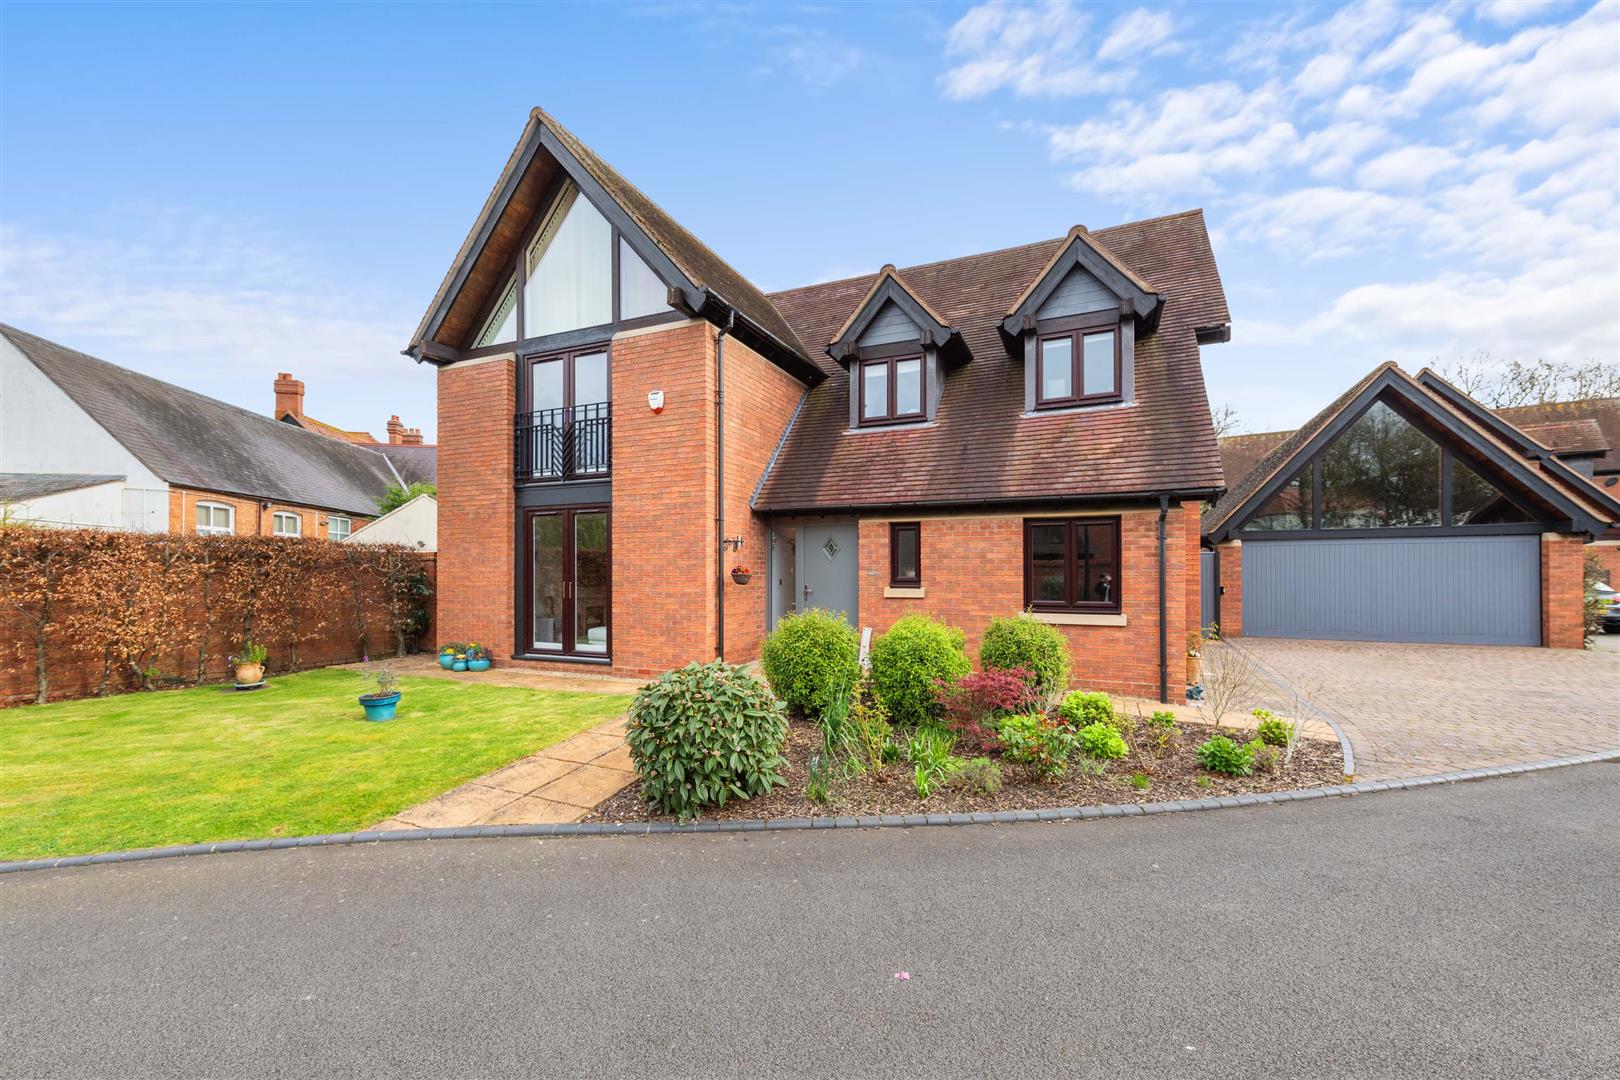 4 bed detached house for sale in Stratford Road, Solihull  - Property Image 1